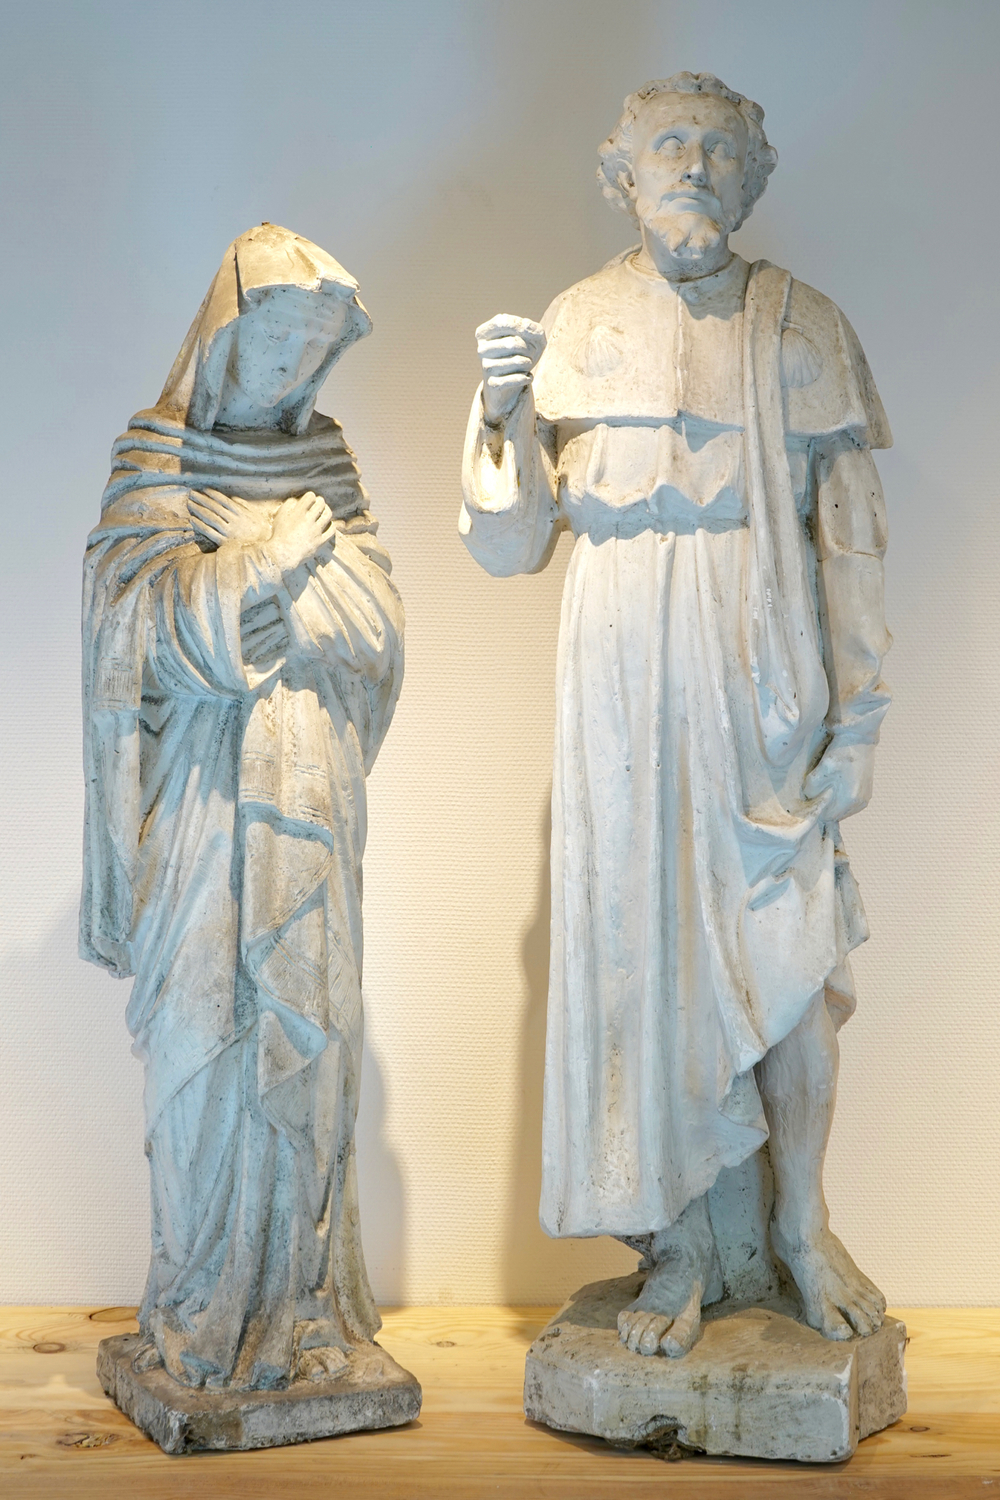 Two plaster casts of religious figures, one of Saint James, 19/20th C., Bruges